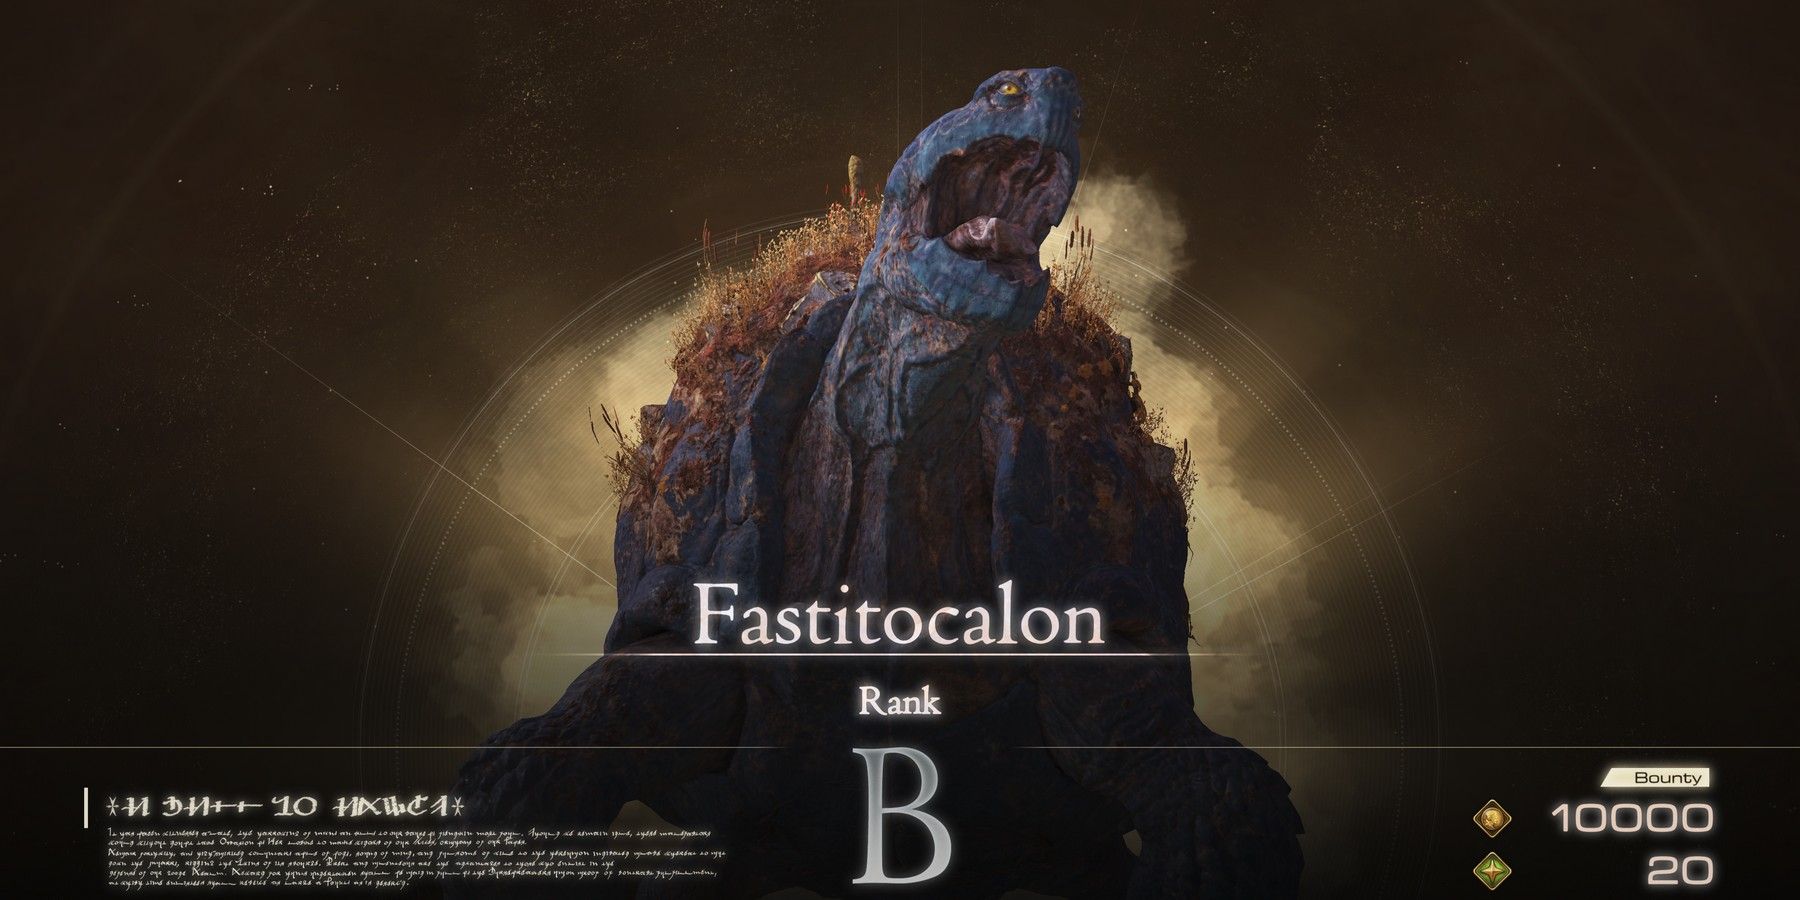 Final Fantasy 16 Where to Find & How to Beat Notorious Mark Fastitocalon (A Hill to Die On)